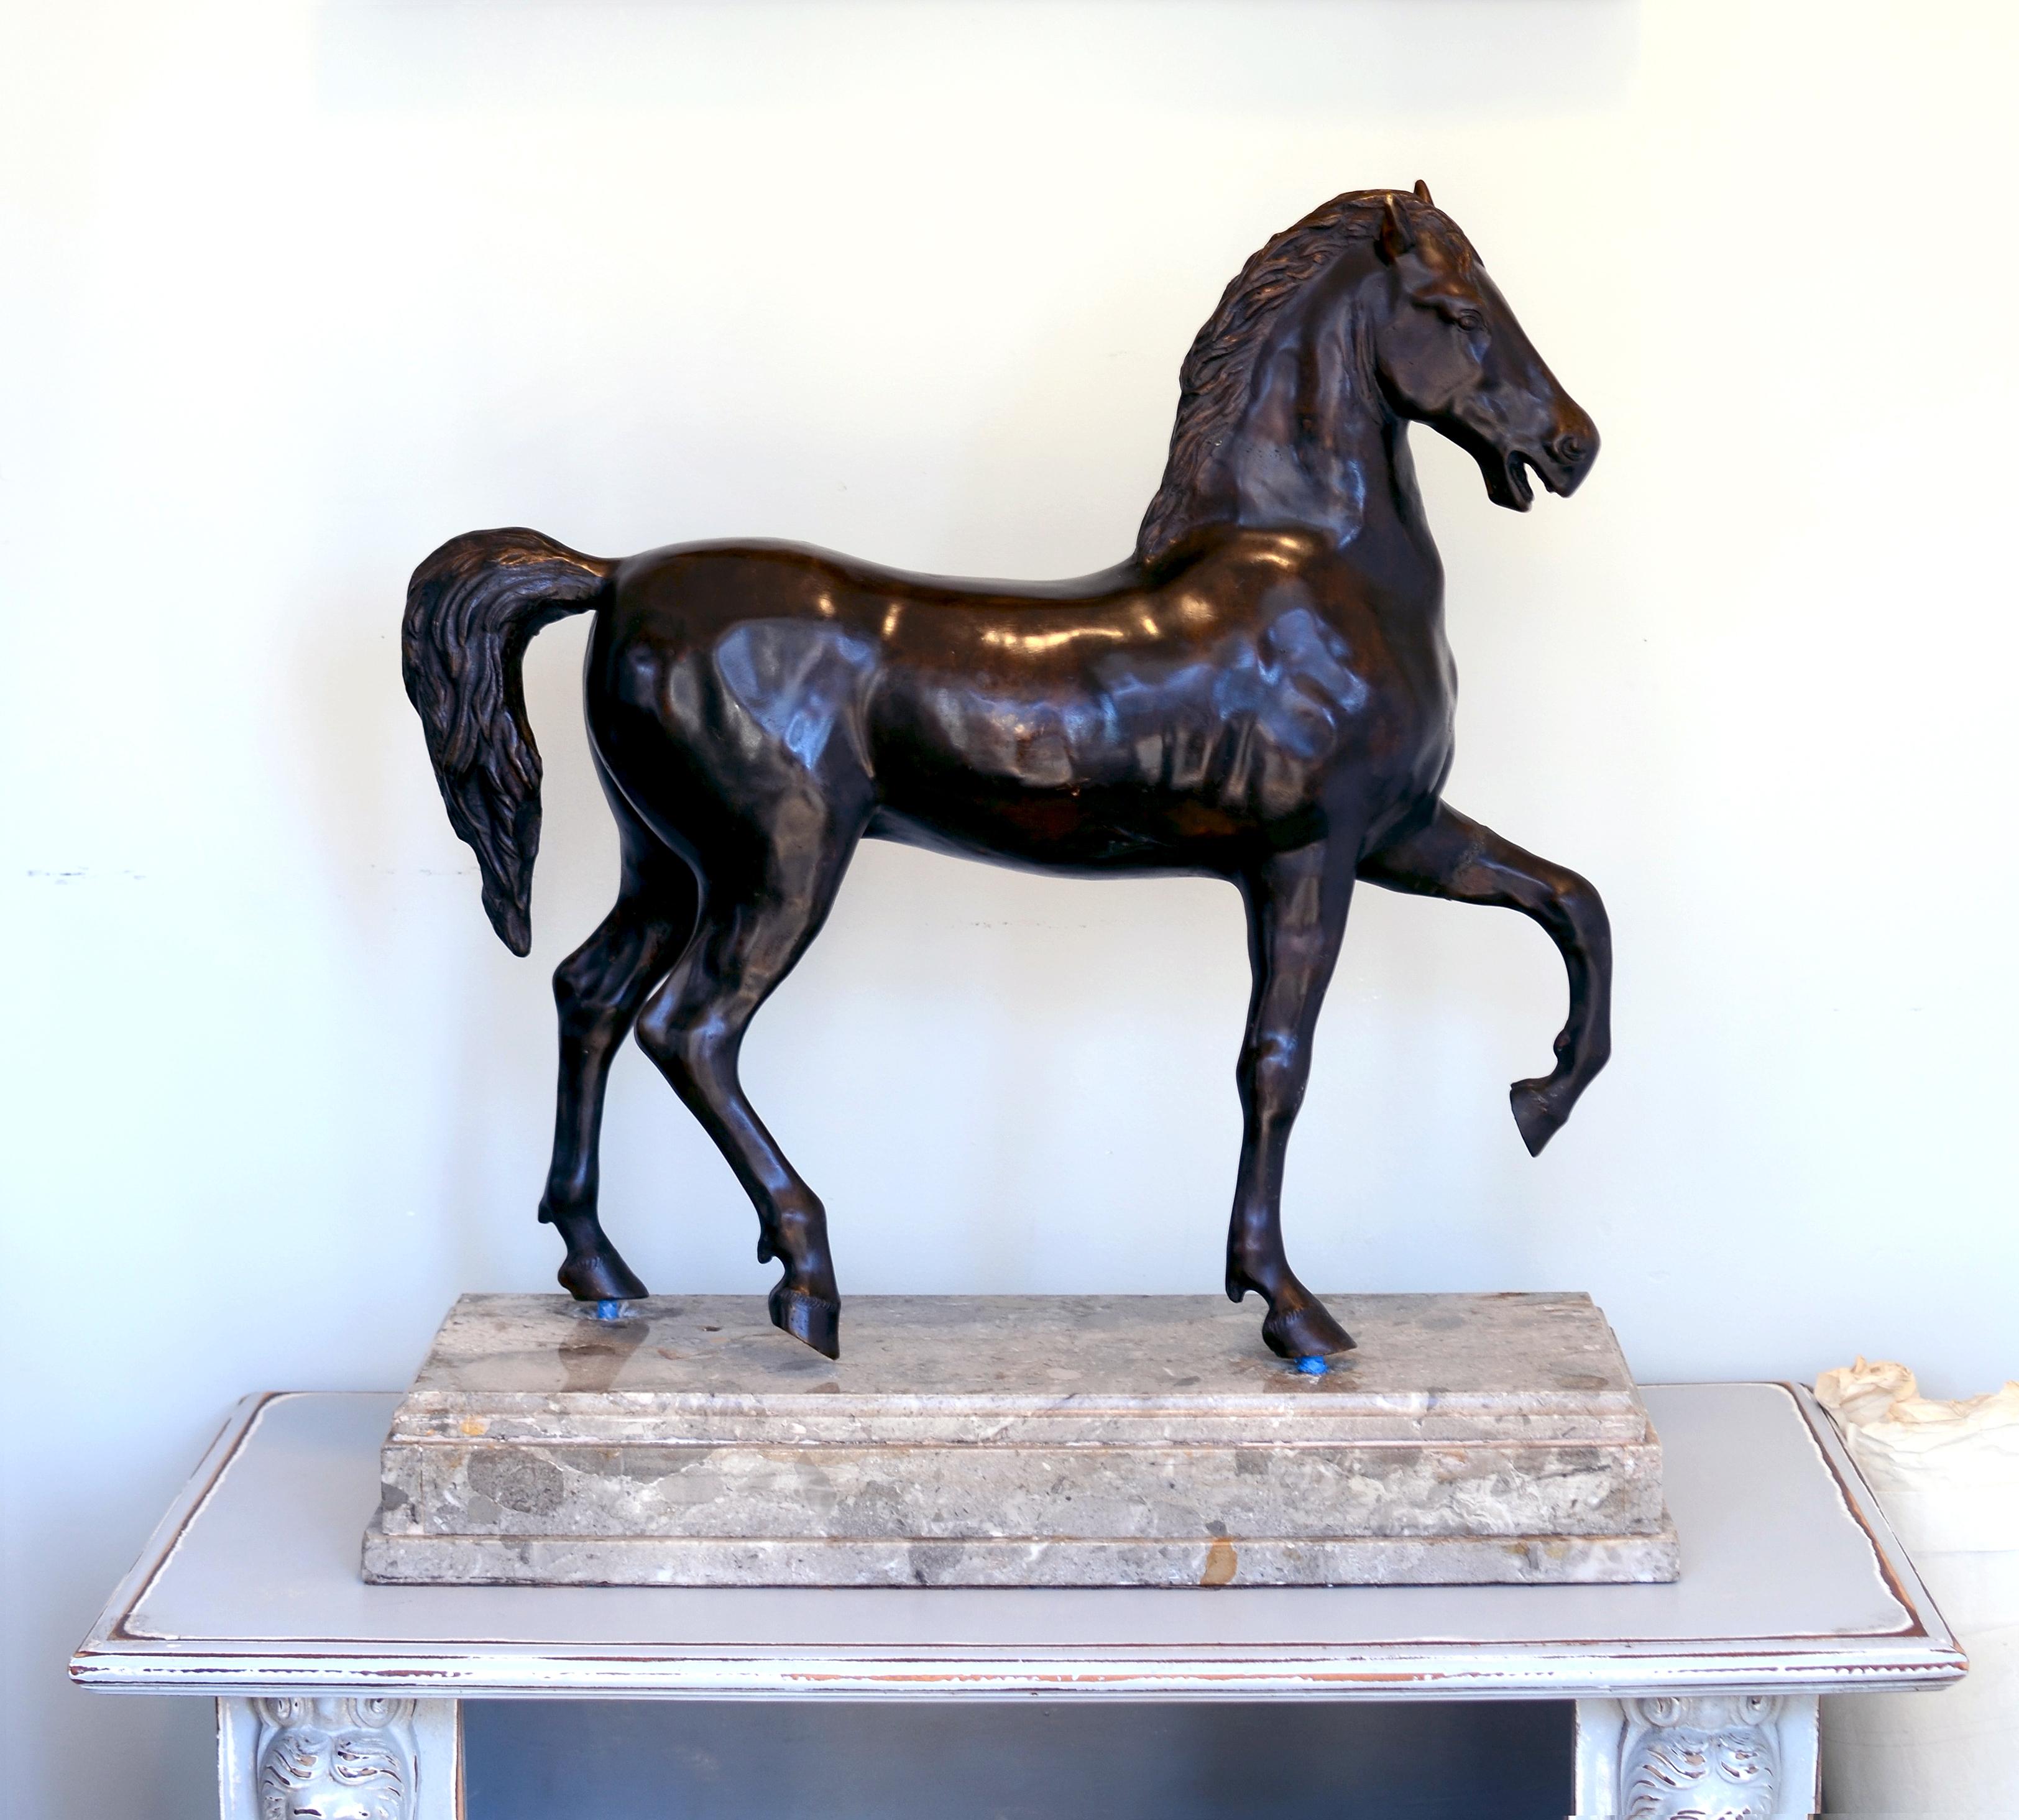 Anonymous
19th century; Italy
Bronze on a marble base

Approximate Size: 26” (h) x 24” (w) x 9” (d)

This large bronze statue of a trotting horse, handsomely realized, features a beautifully aged patina. Its realization is in-keeping with the